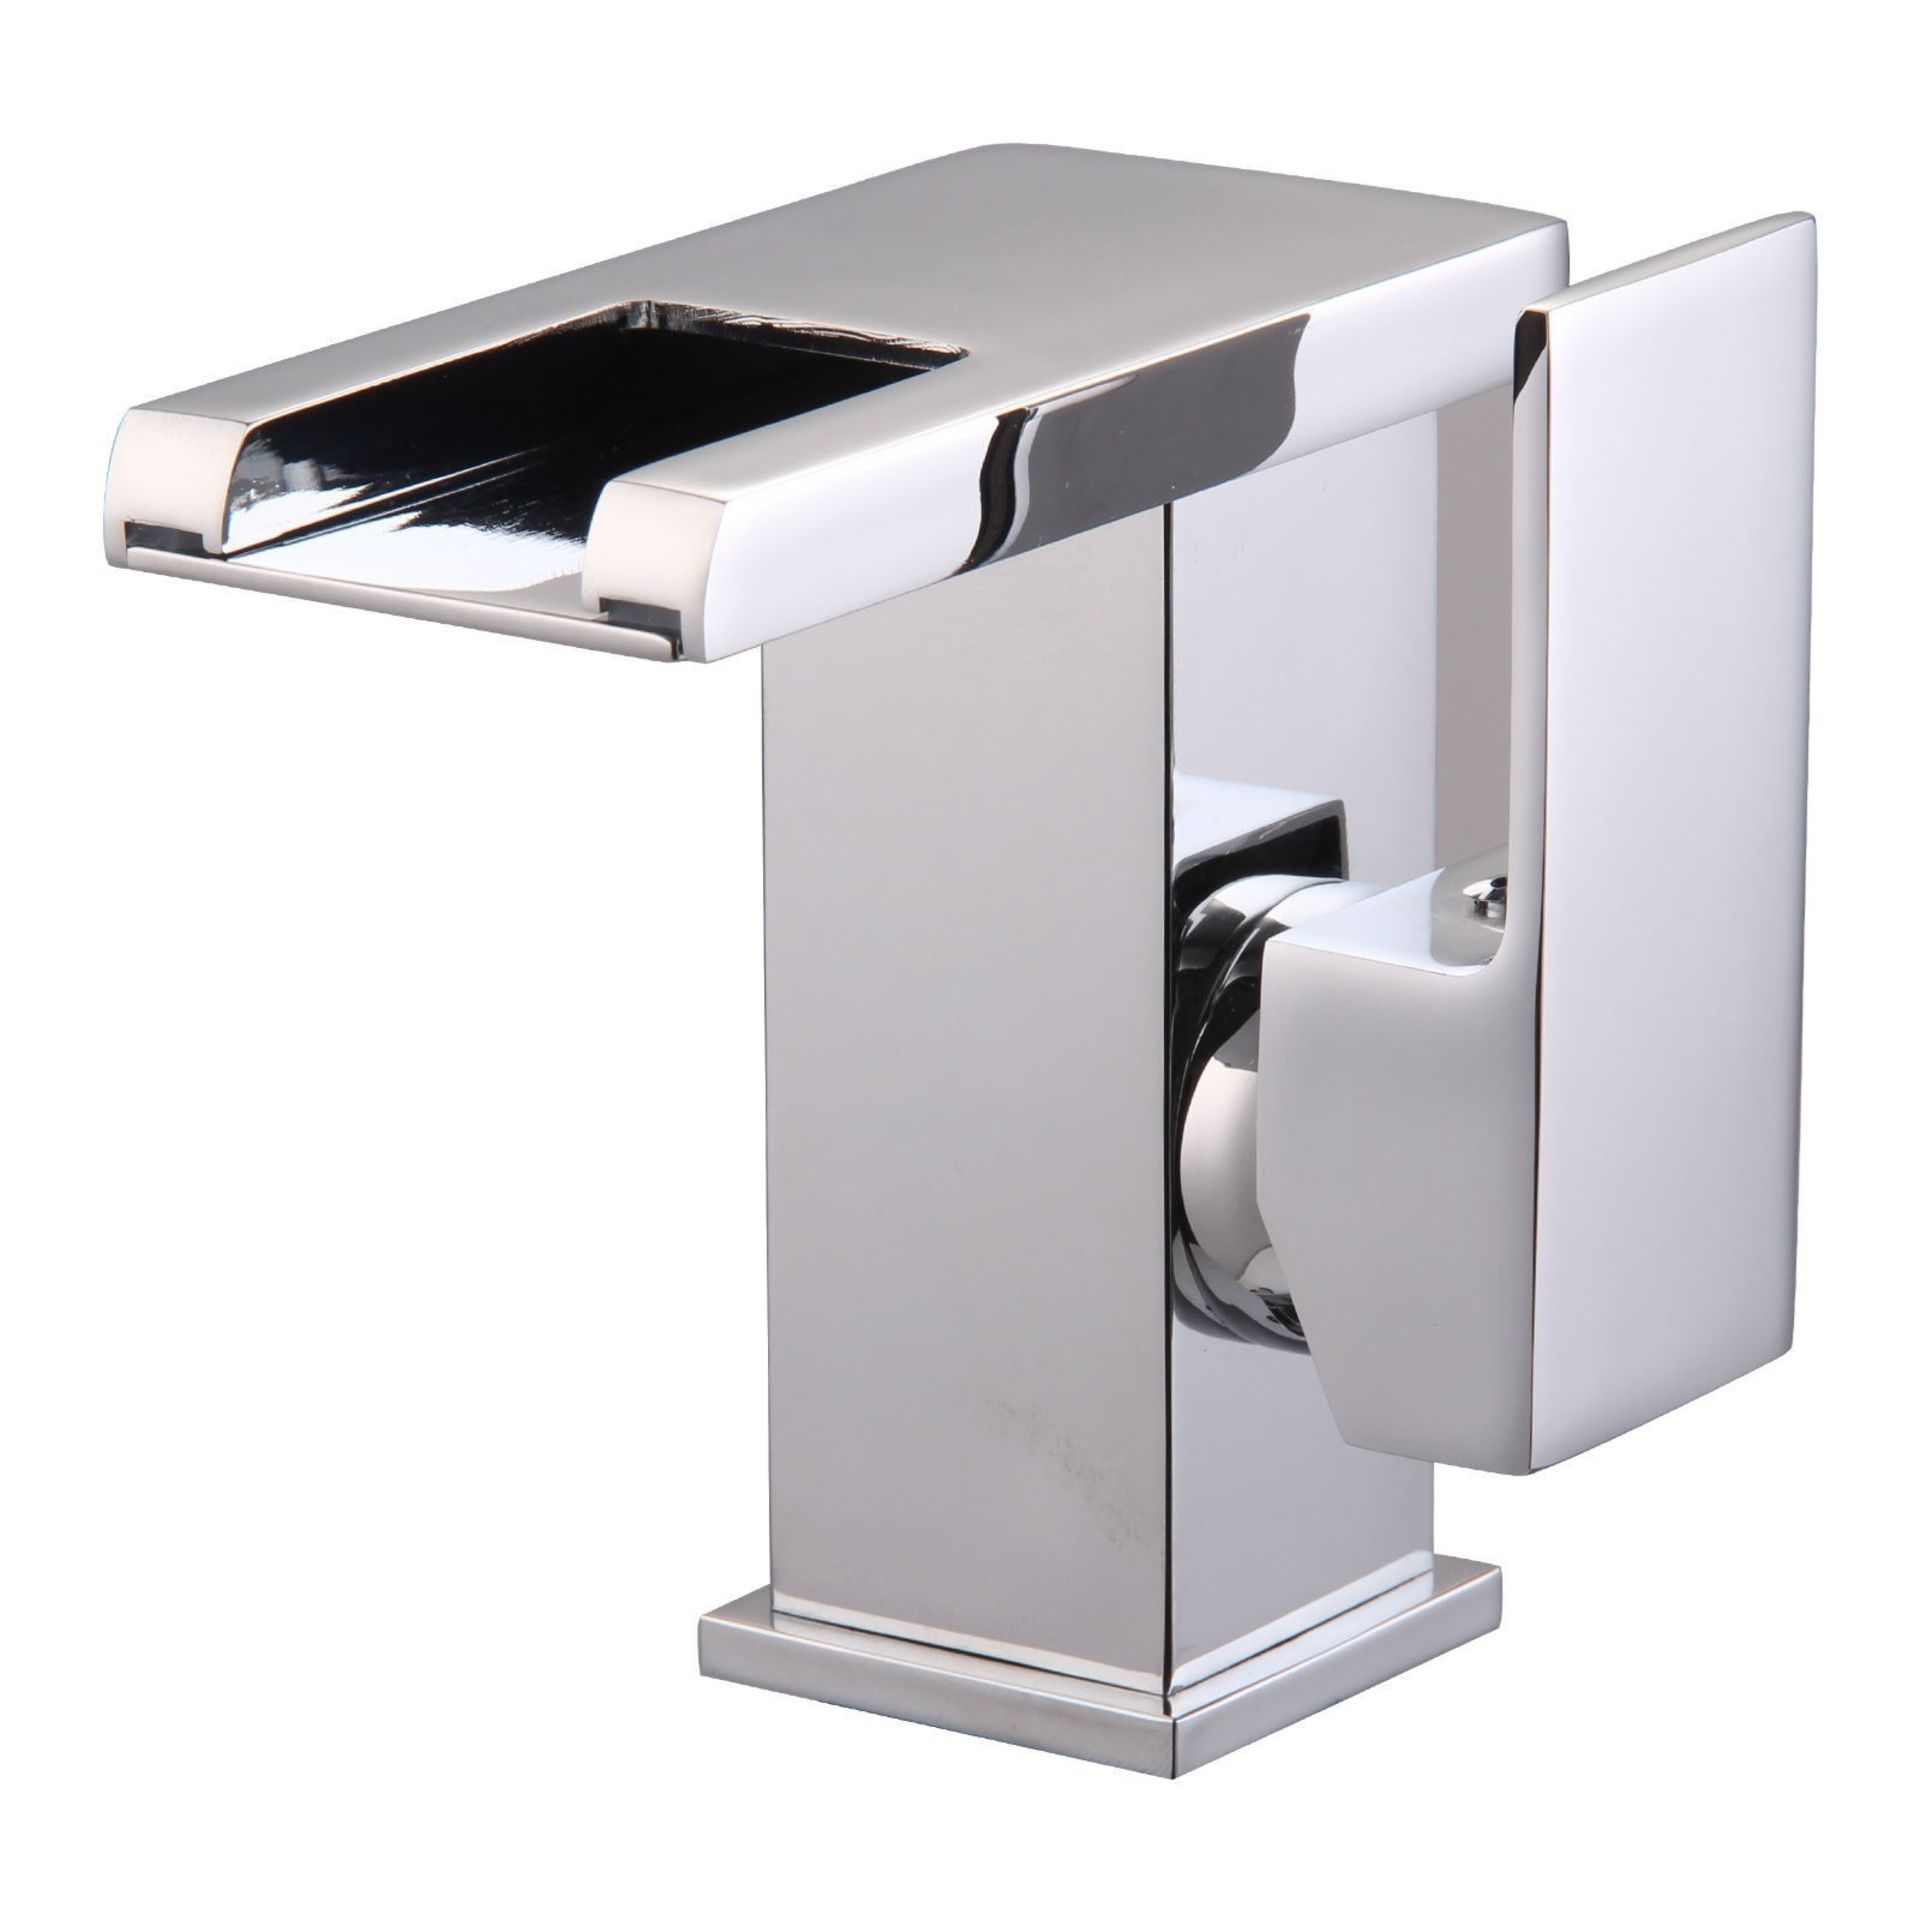 LED Waterfall Bathroom Basin Mixer Tap. RRP £229.99.Easy to install and clean. All copper mo... - Image 2 of 3